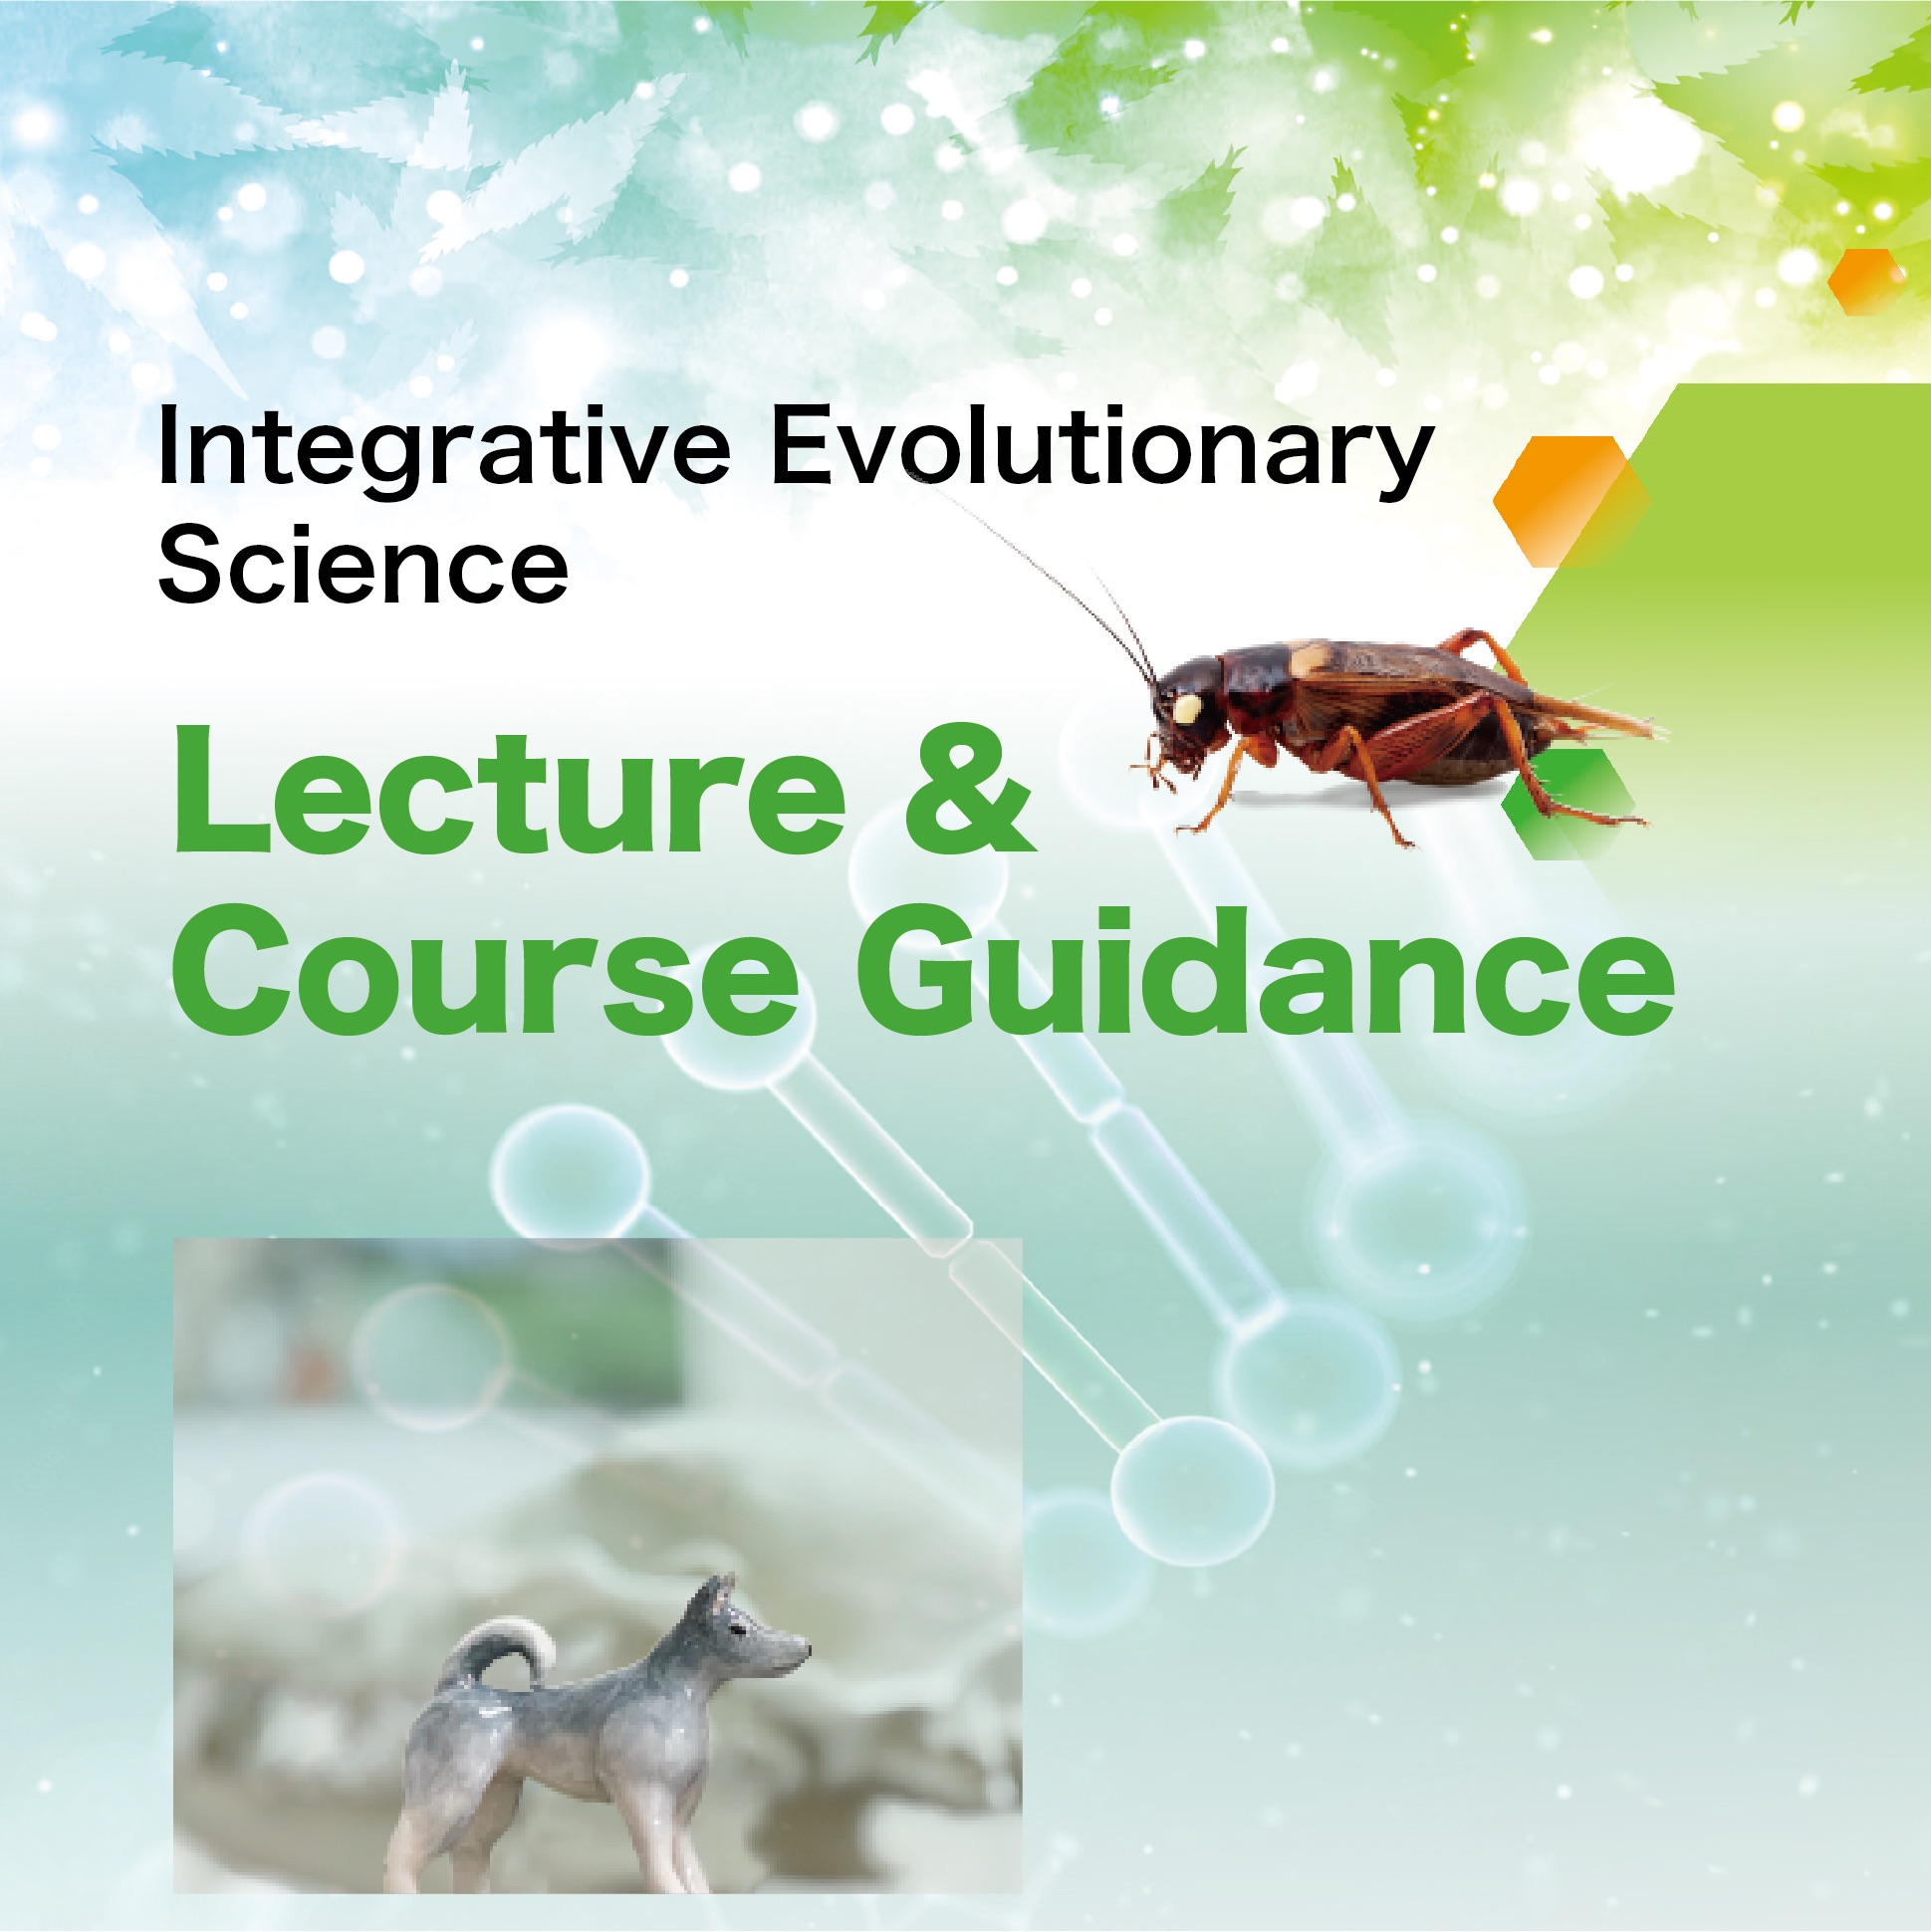 Lecture & Course guidance